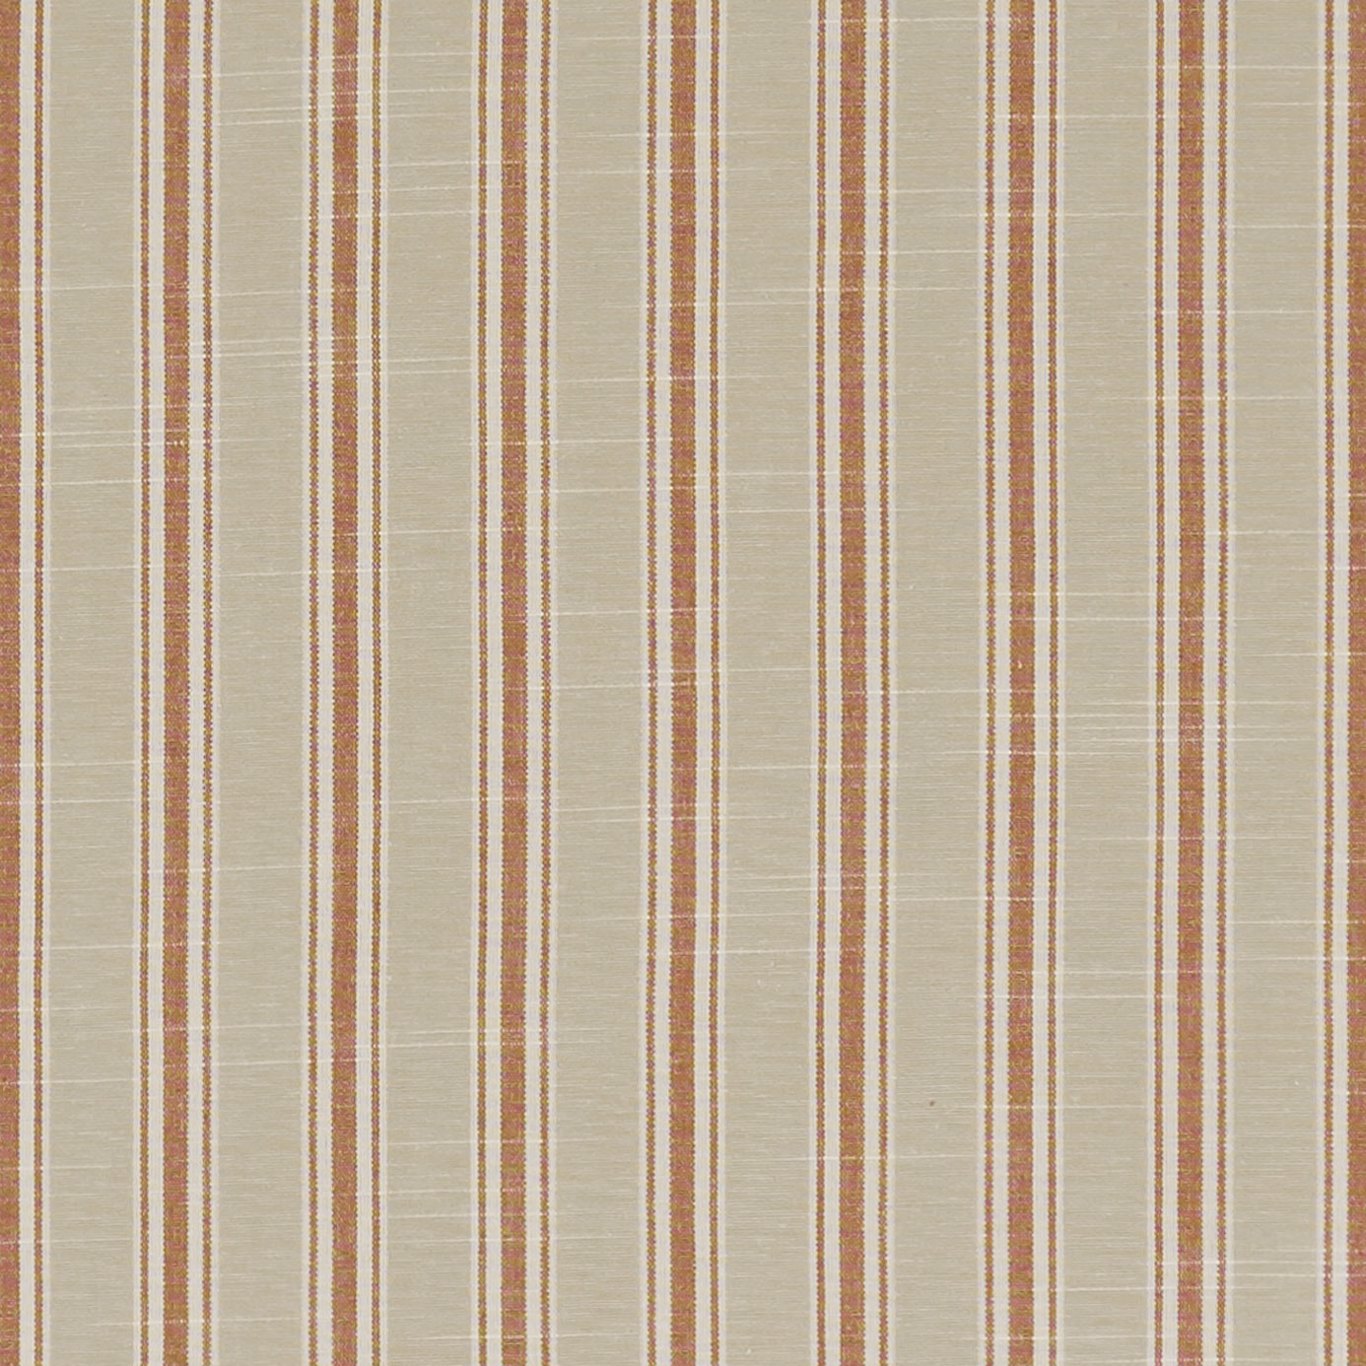 Thornwick Spice Fabric by CNC